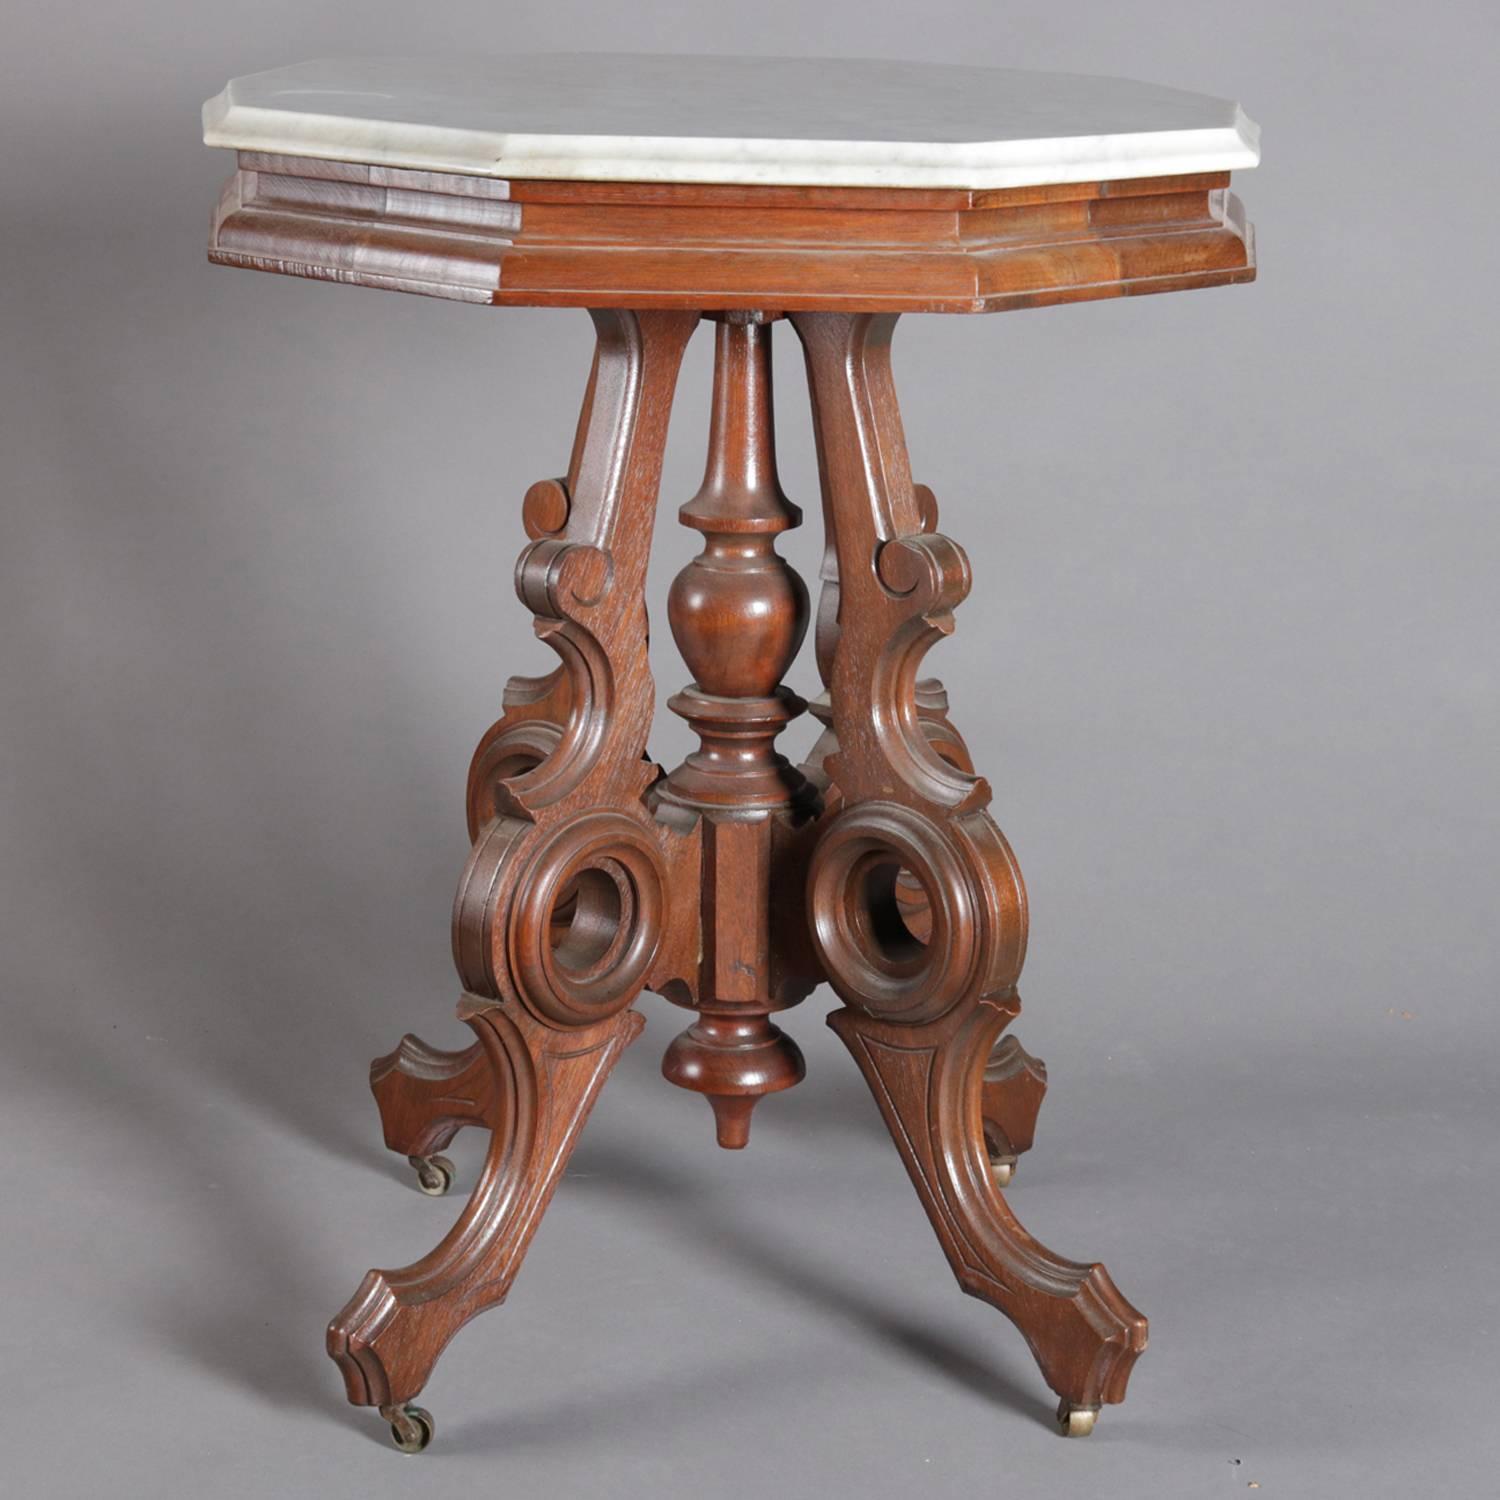 20th Century Victorian Eastlake Carved Walnut and Marble Parlor Table, 19th Century